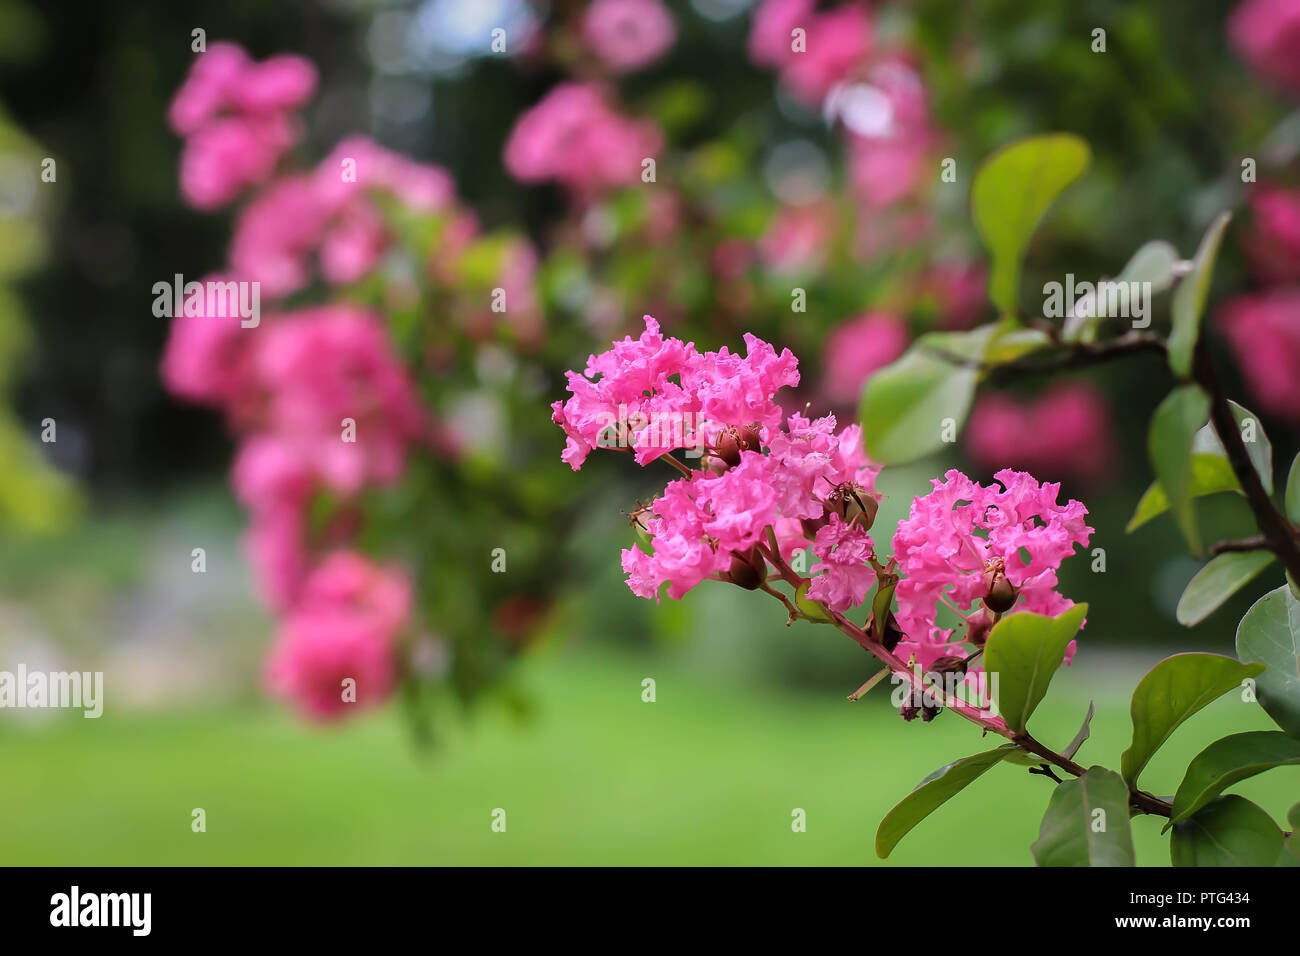 Pink flowers of Lagerstroemia indica / crape myrtle Stock Photo